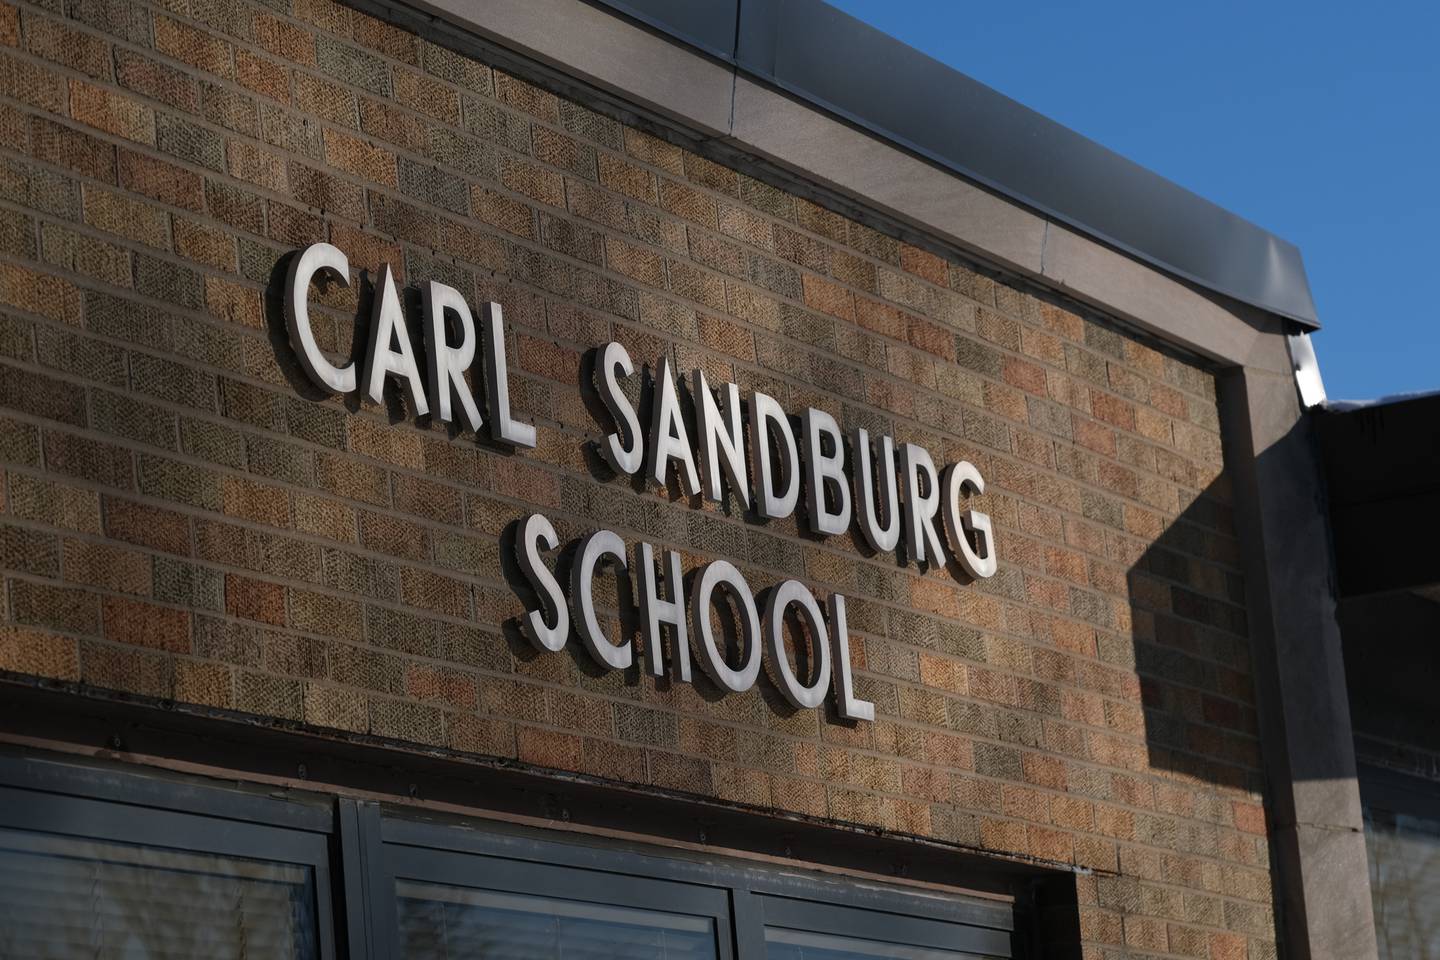 Carl Sandburg School, along with other District 86 schools, closed for the day due to cold weather. Wednesday, Jan. 26, 2022 in Joliet.